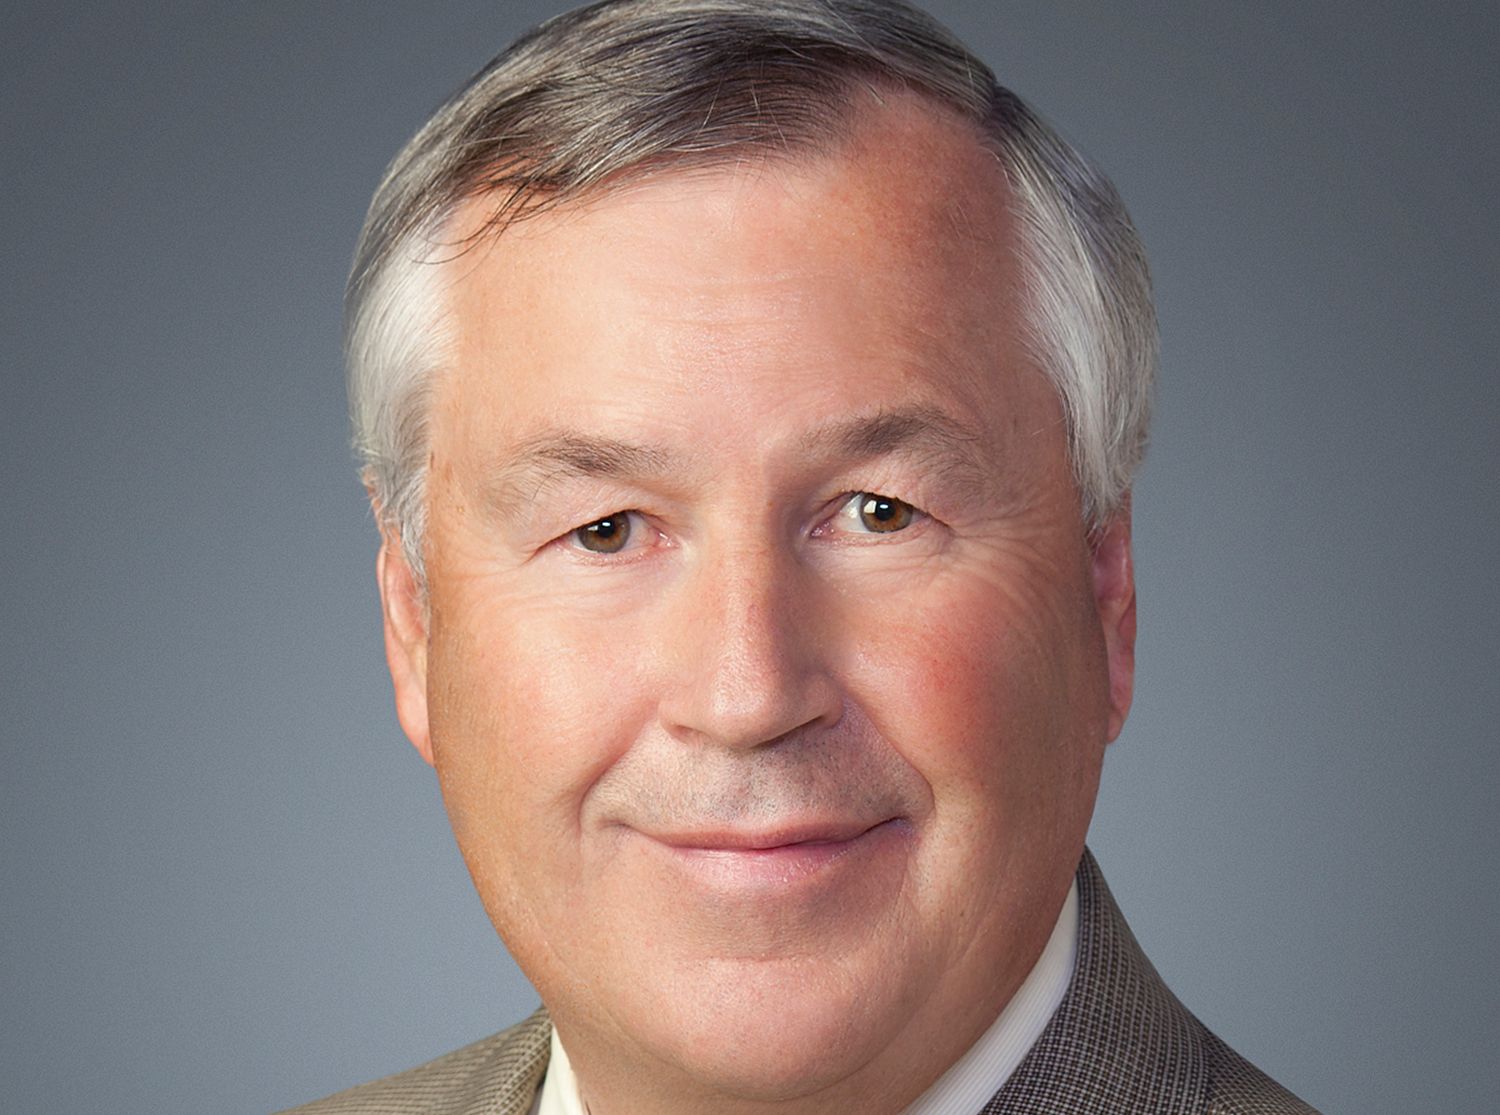 Art Price, chairman and CEO